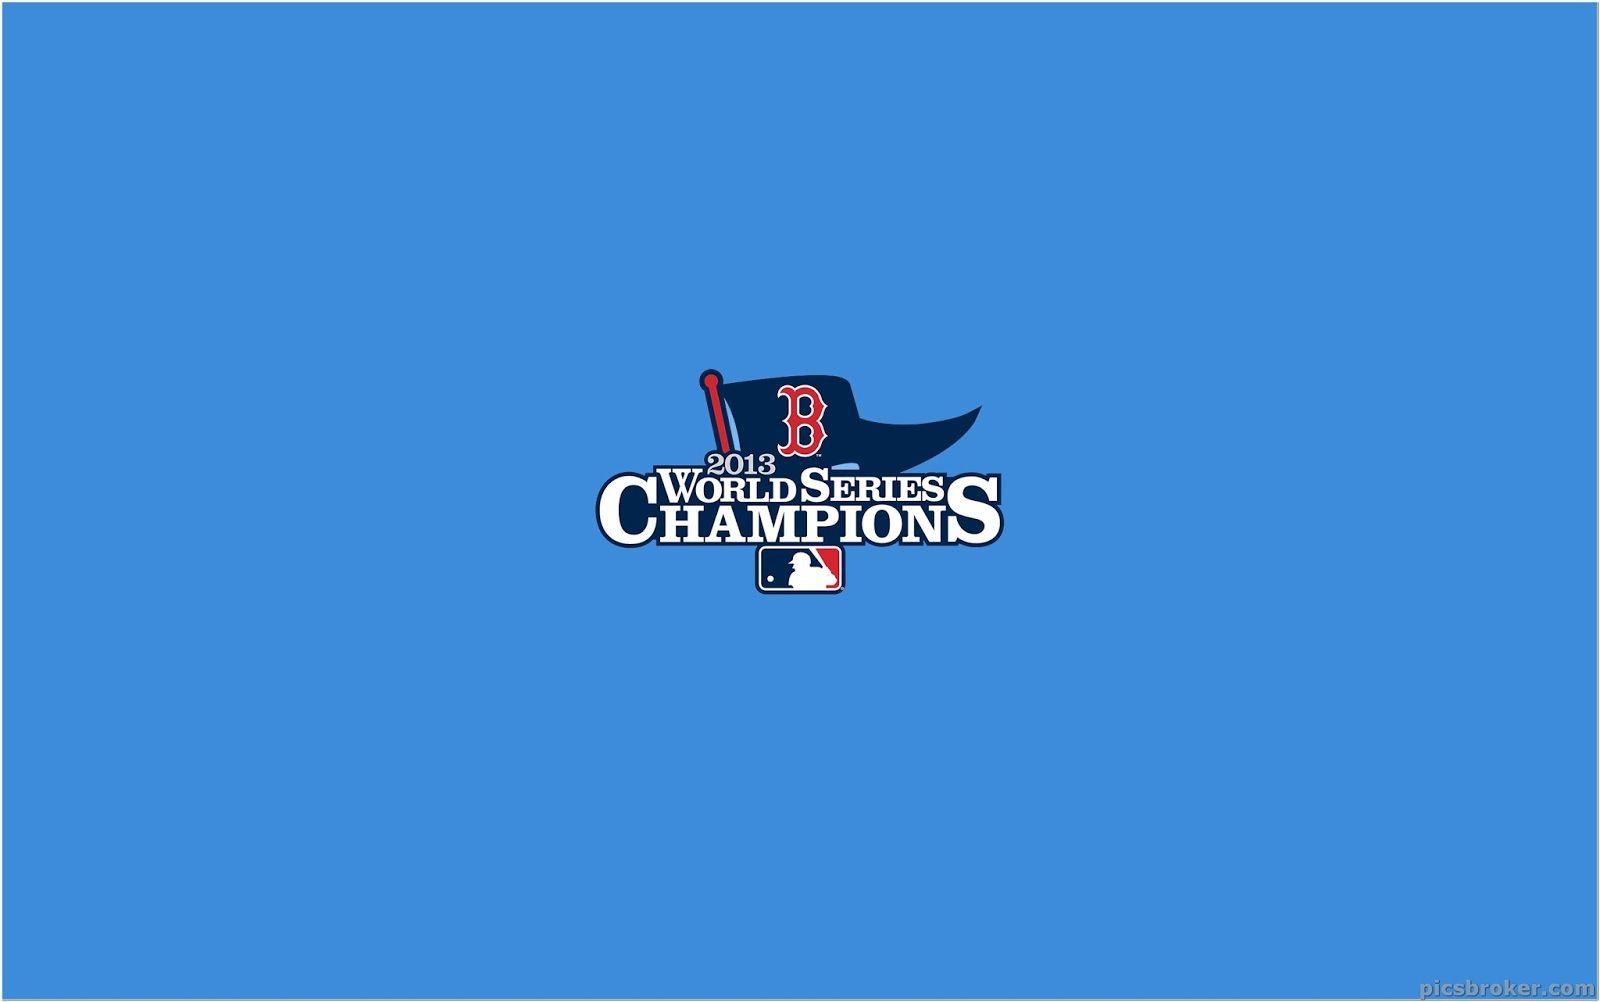 Boston Red Sox Wallpapers - Wallpaper Cave